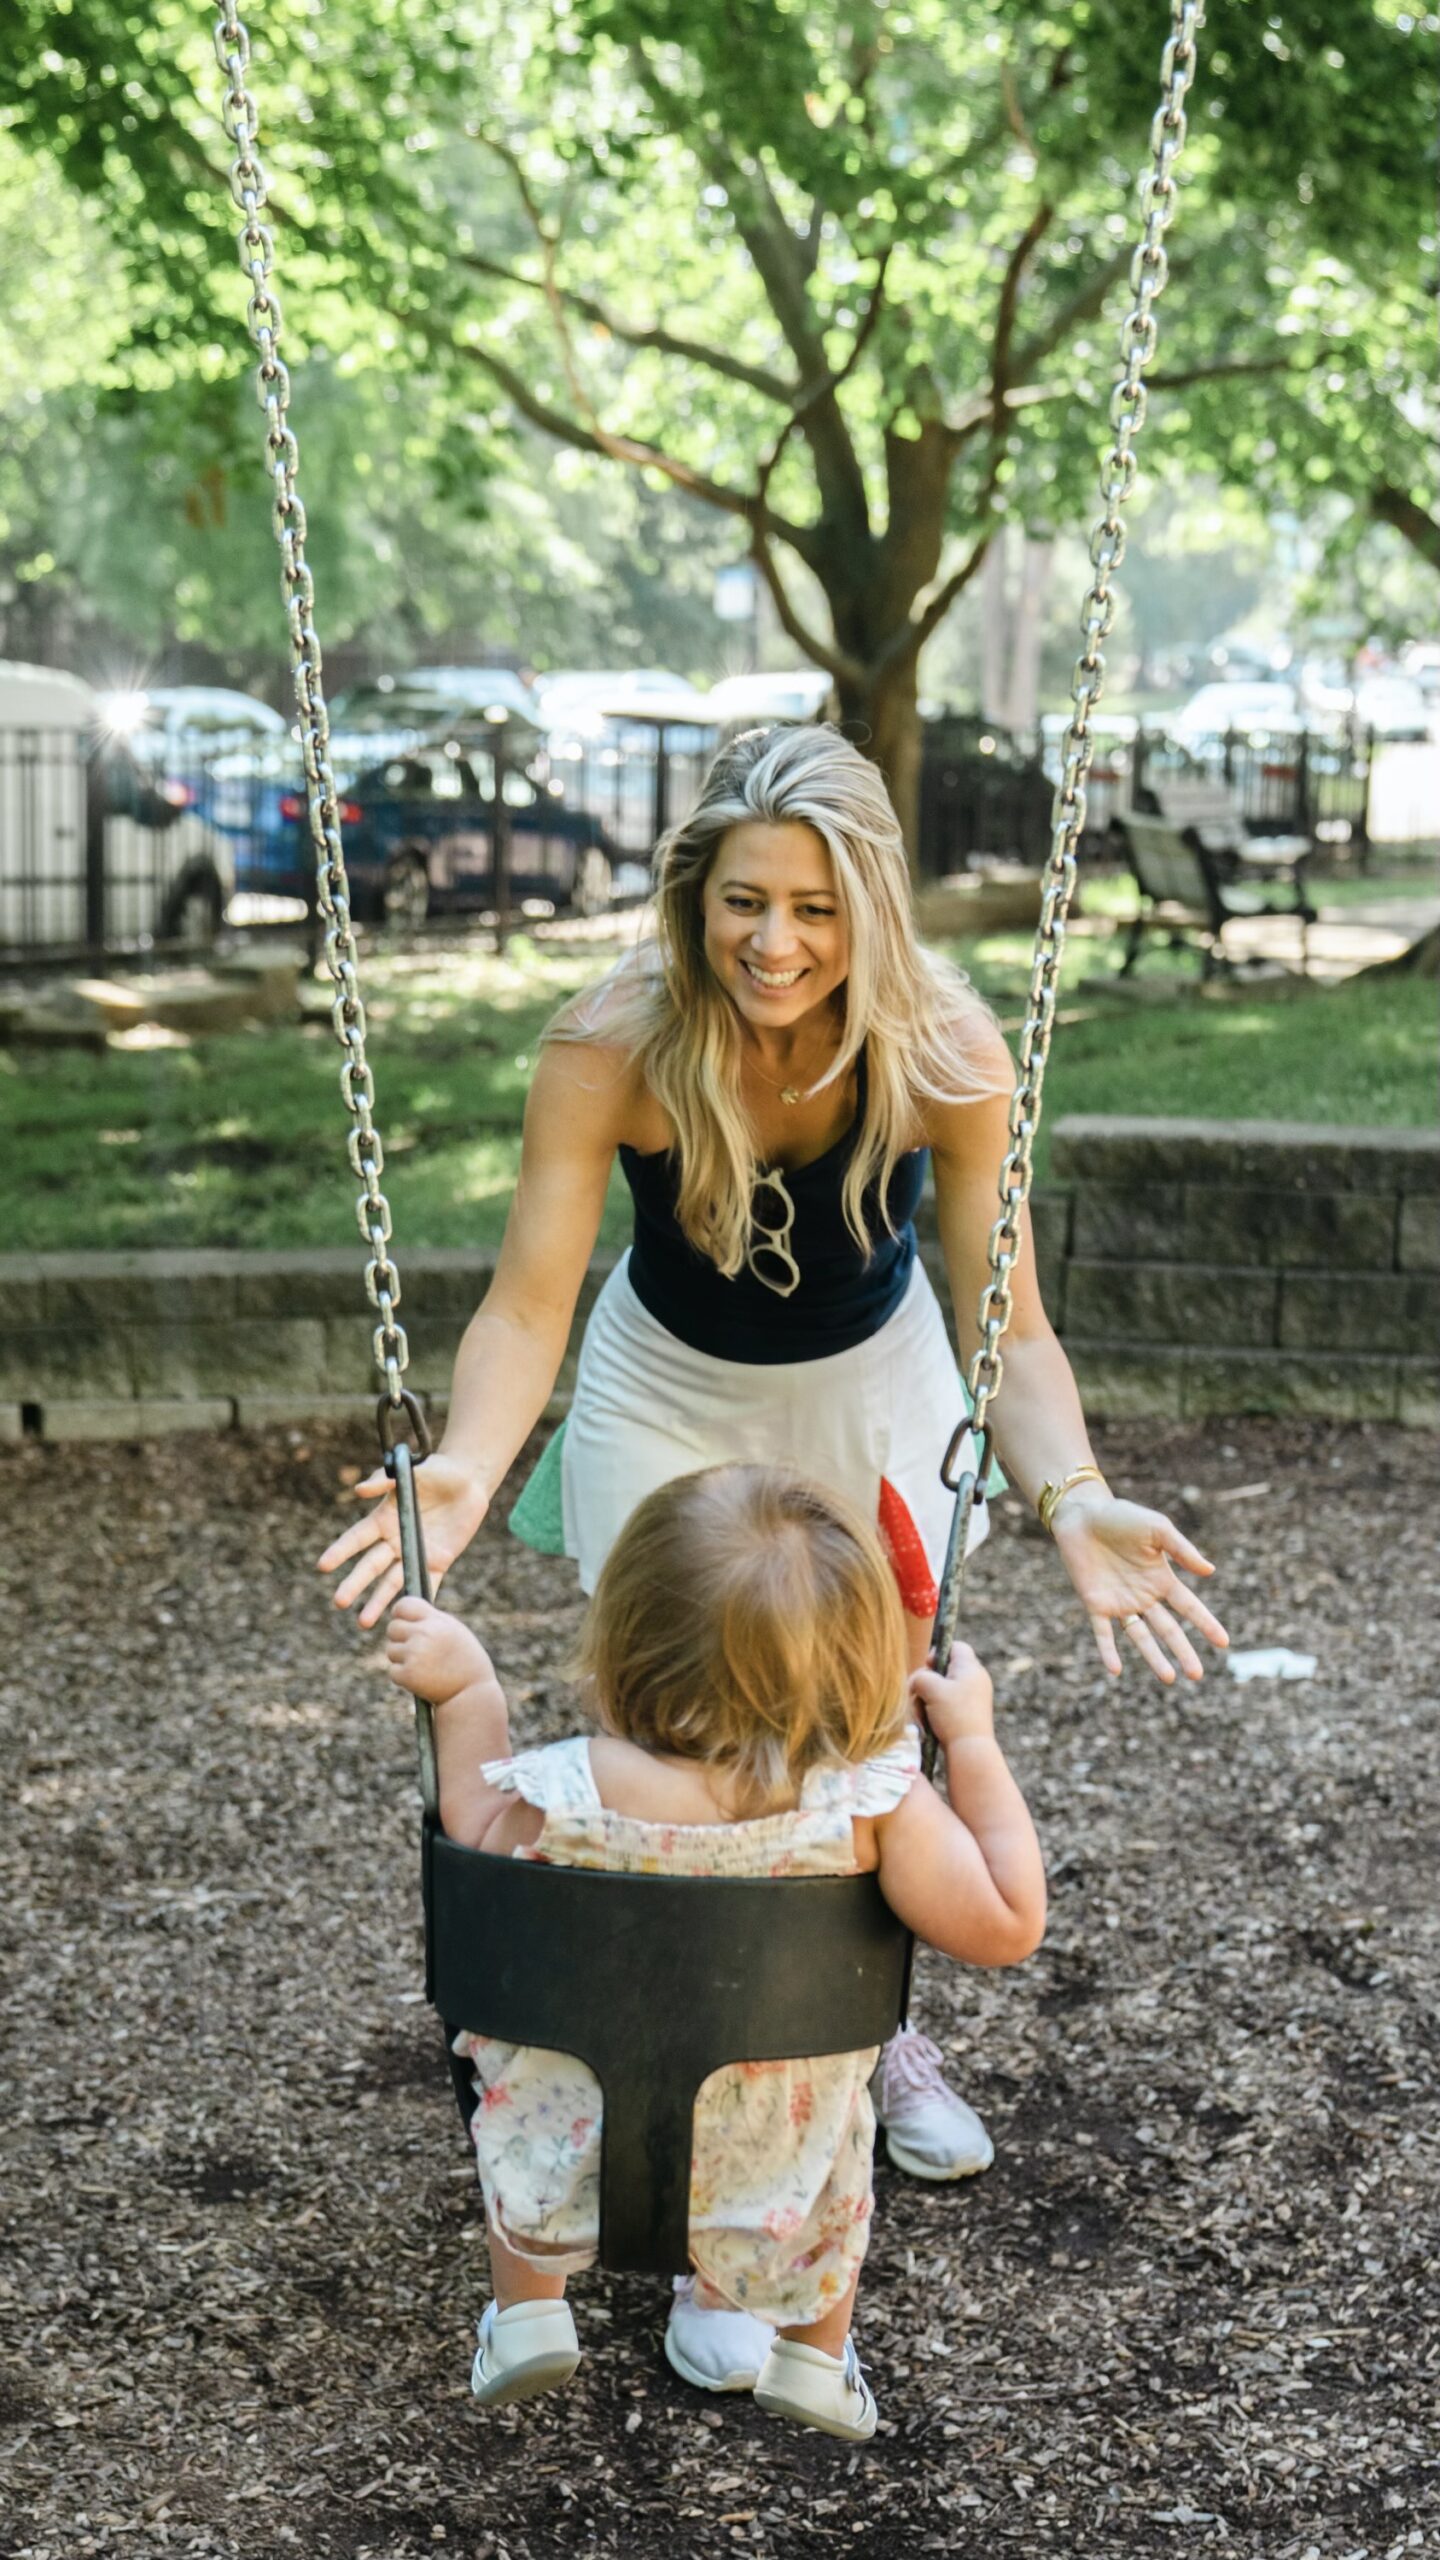 mother and child at the park - Australia Travel Guide